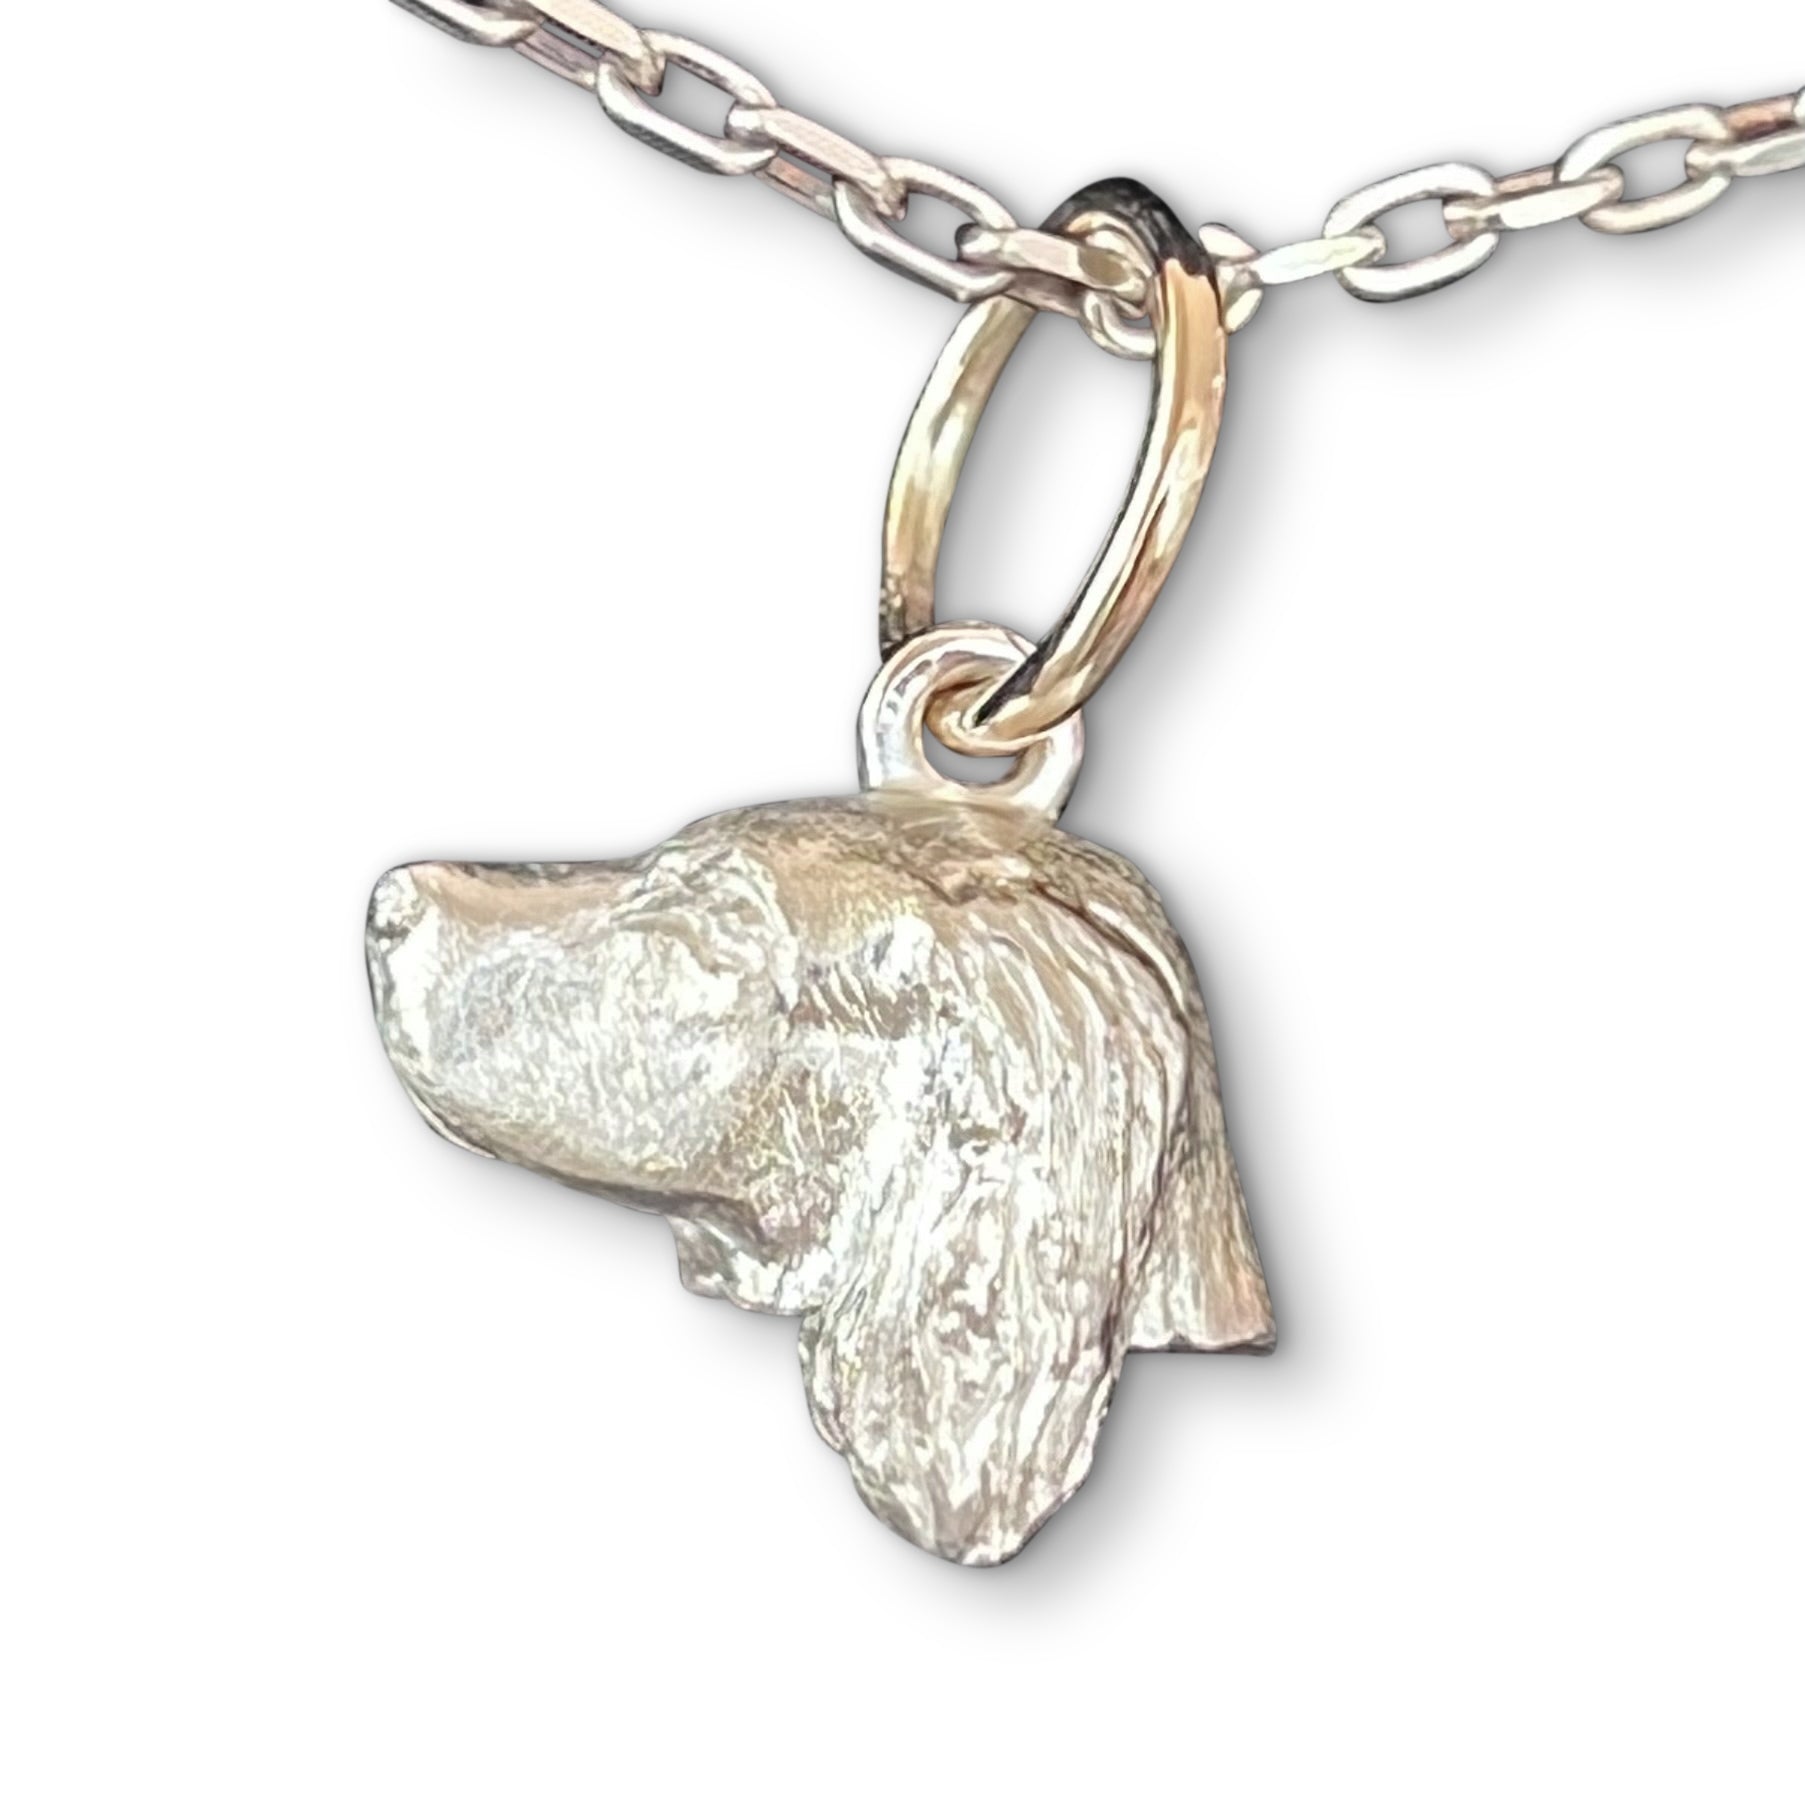 Spaniel Pendant/Charm with 9ct gold Ring by Paul Eaton Sculptor